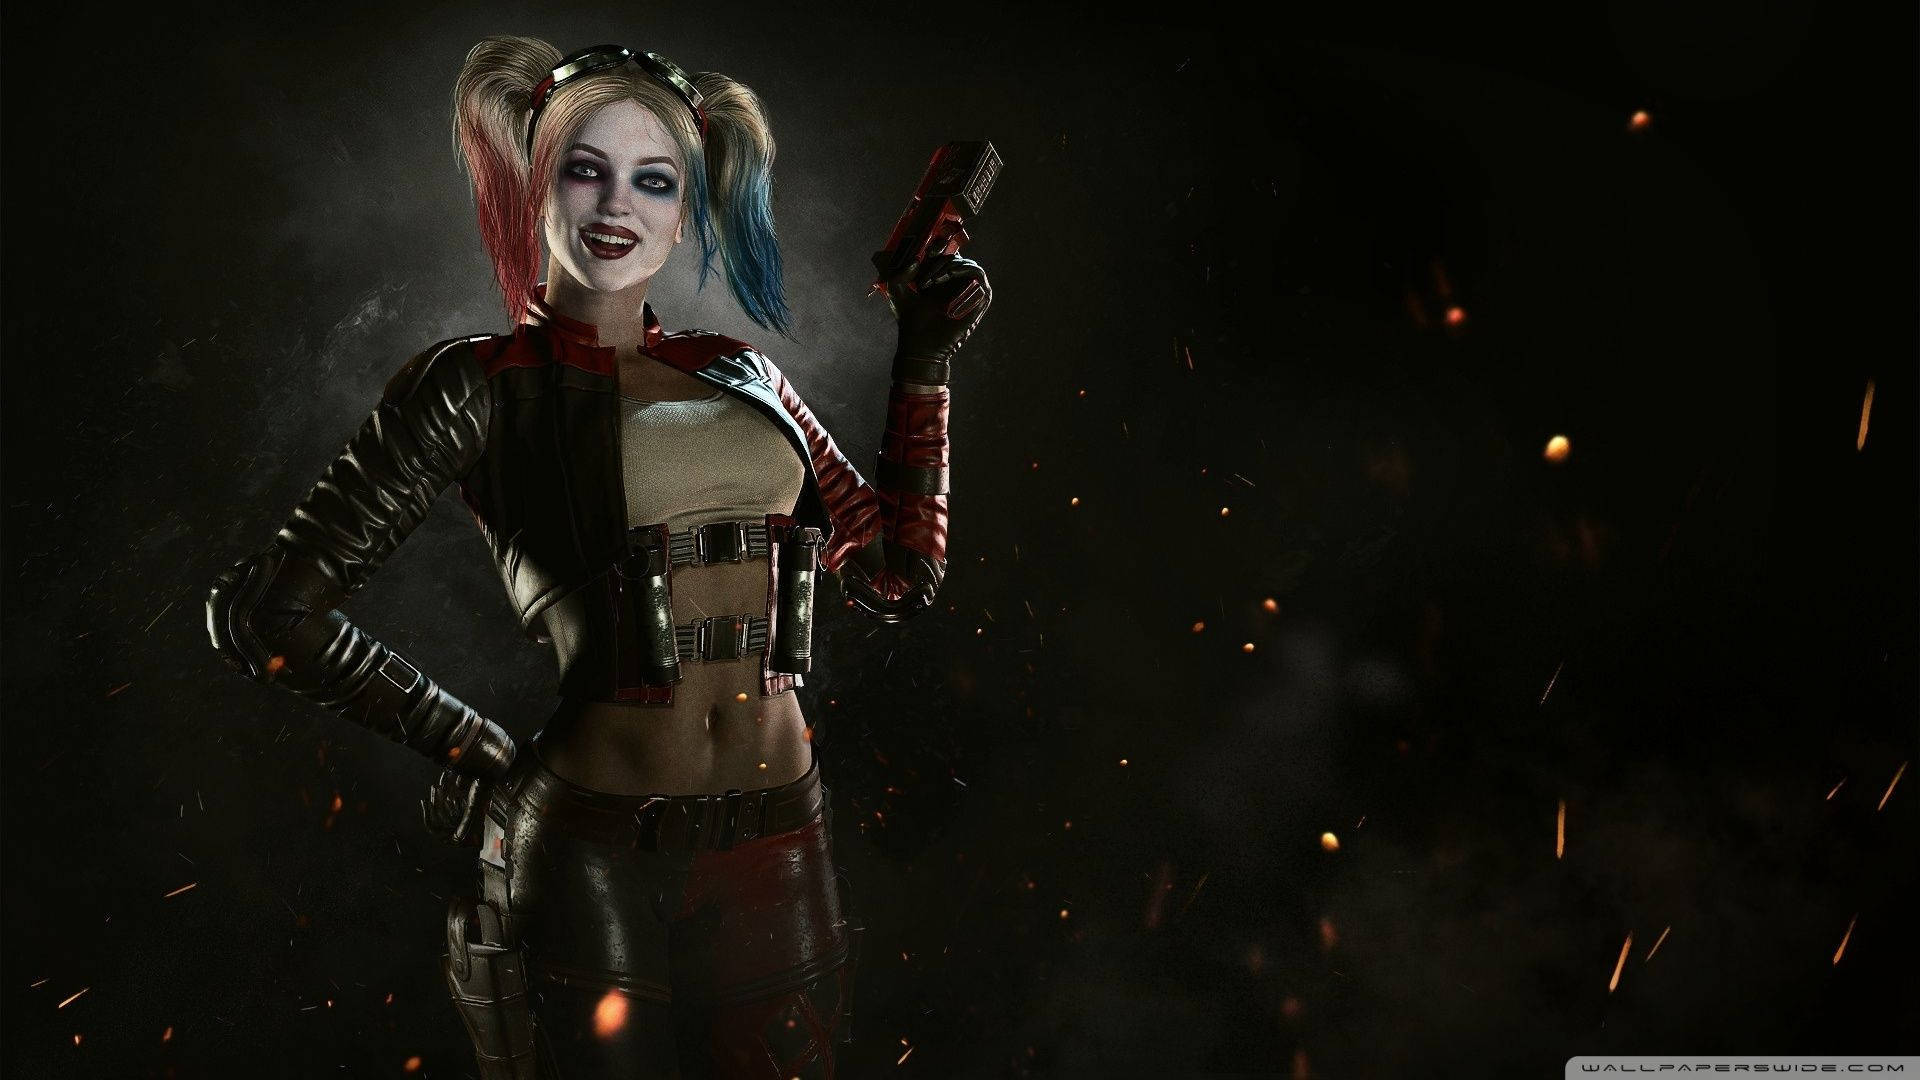 Shiny Leather Outfit Harley Quinn 4k